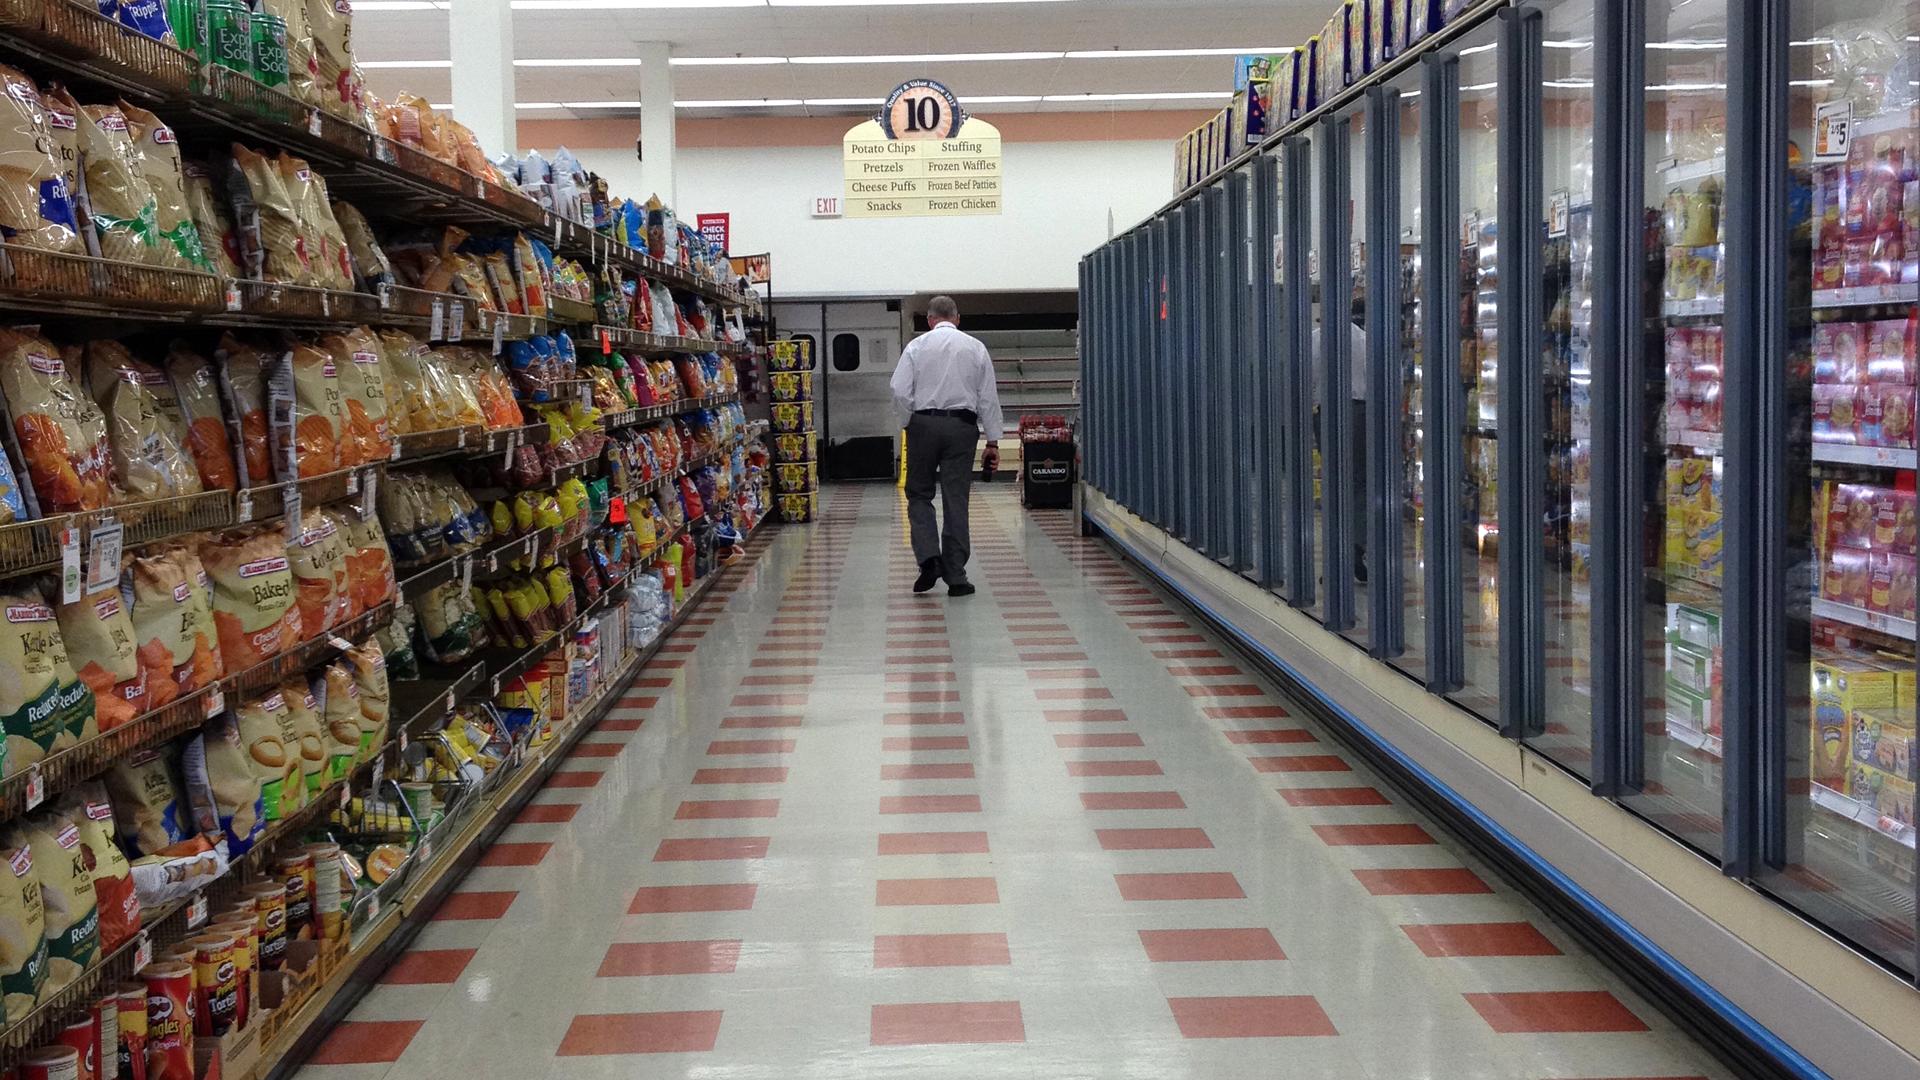 Michael Dunleavy walks down an empty aisle of the Market Basket grocery store he manages in Somerville, Mass.